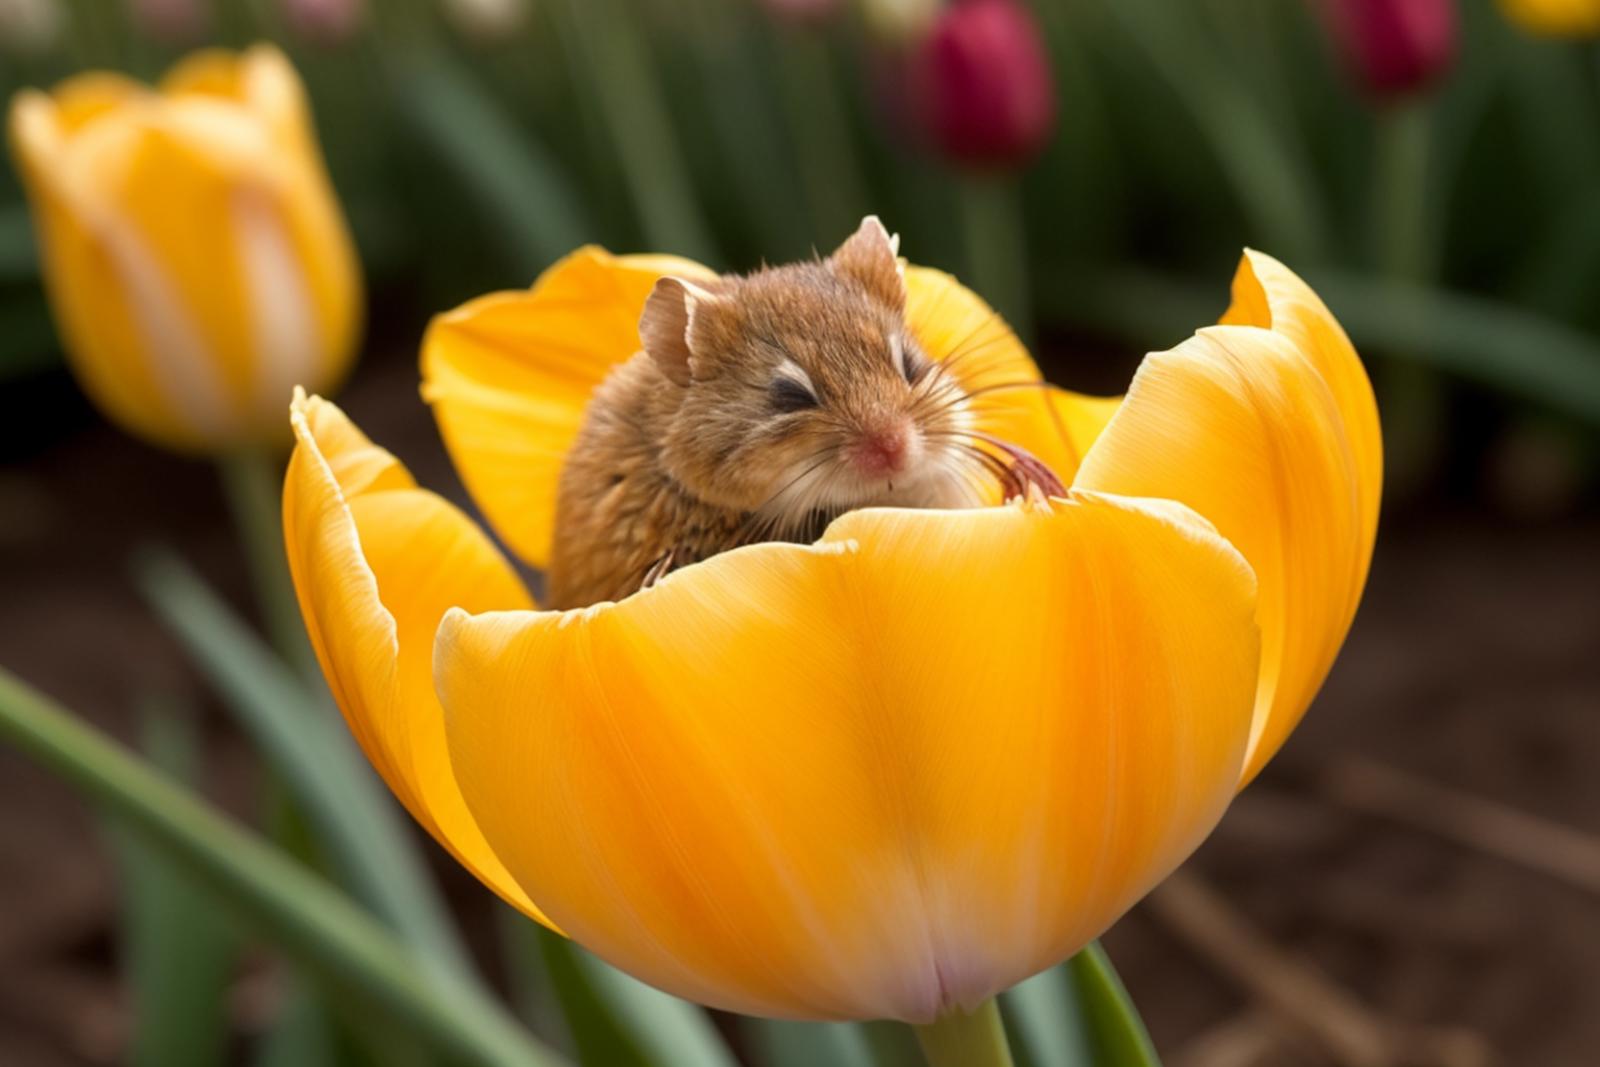 A small brown mouse sitting in the flower petals of a yellow tulip.